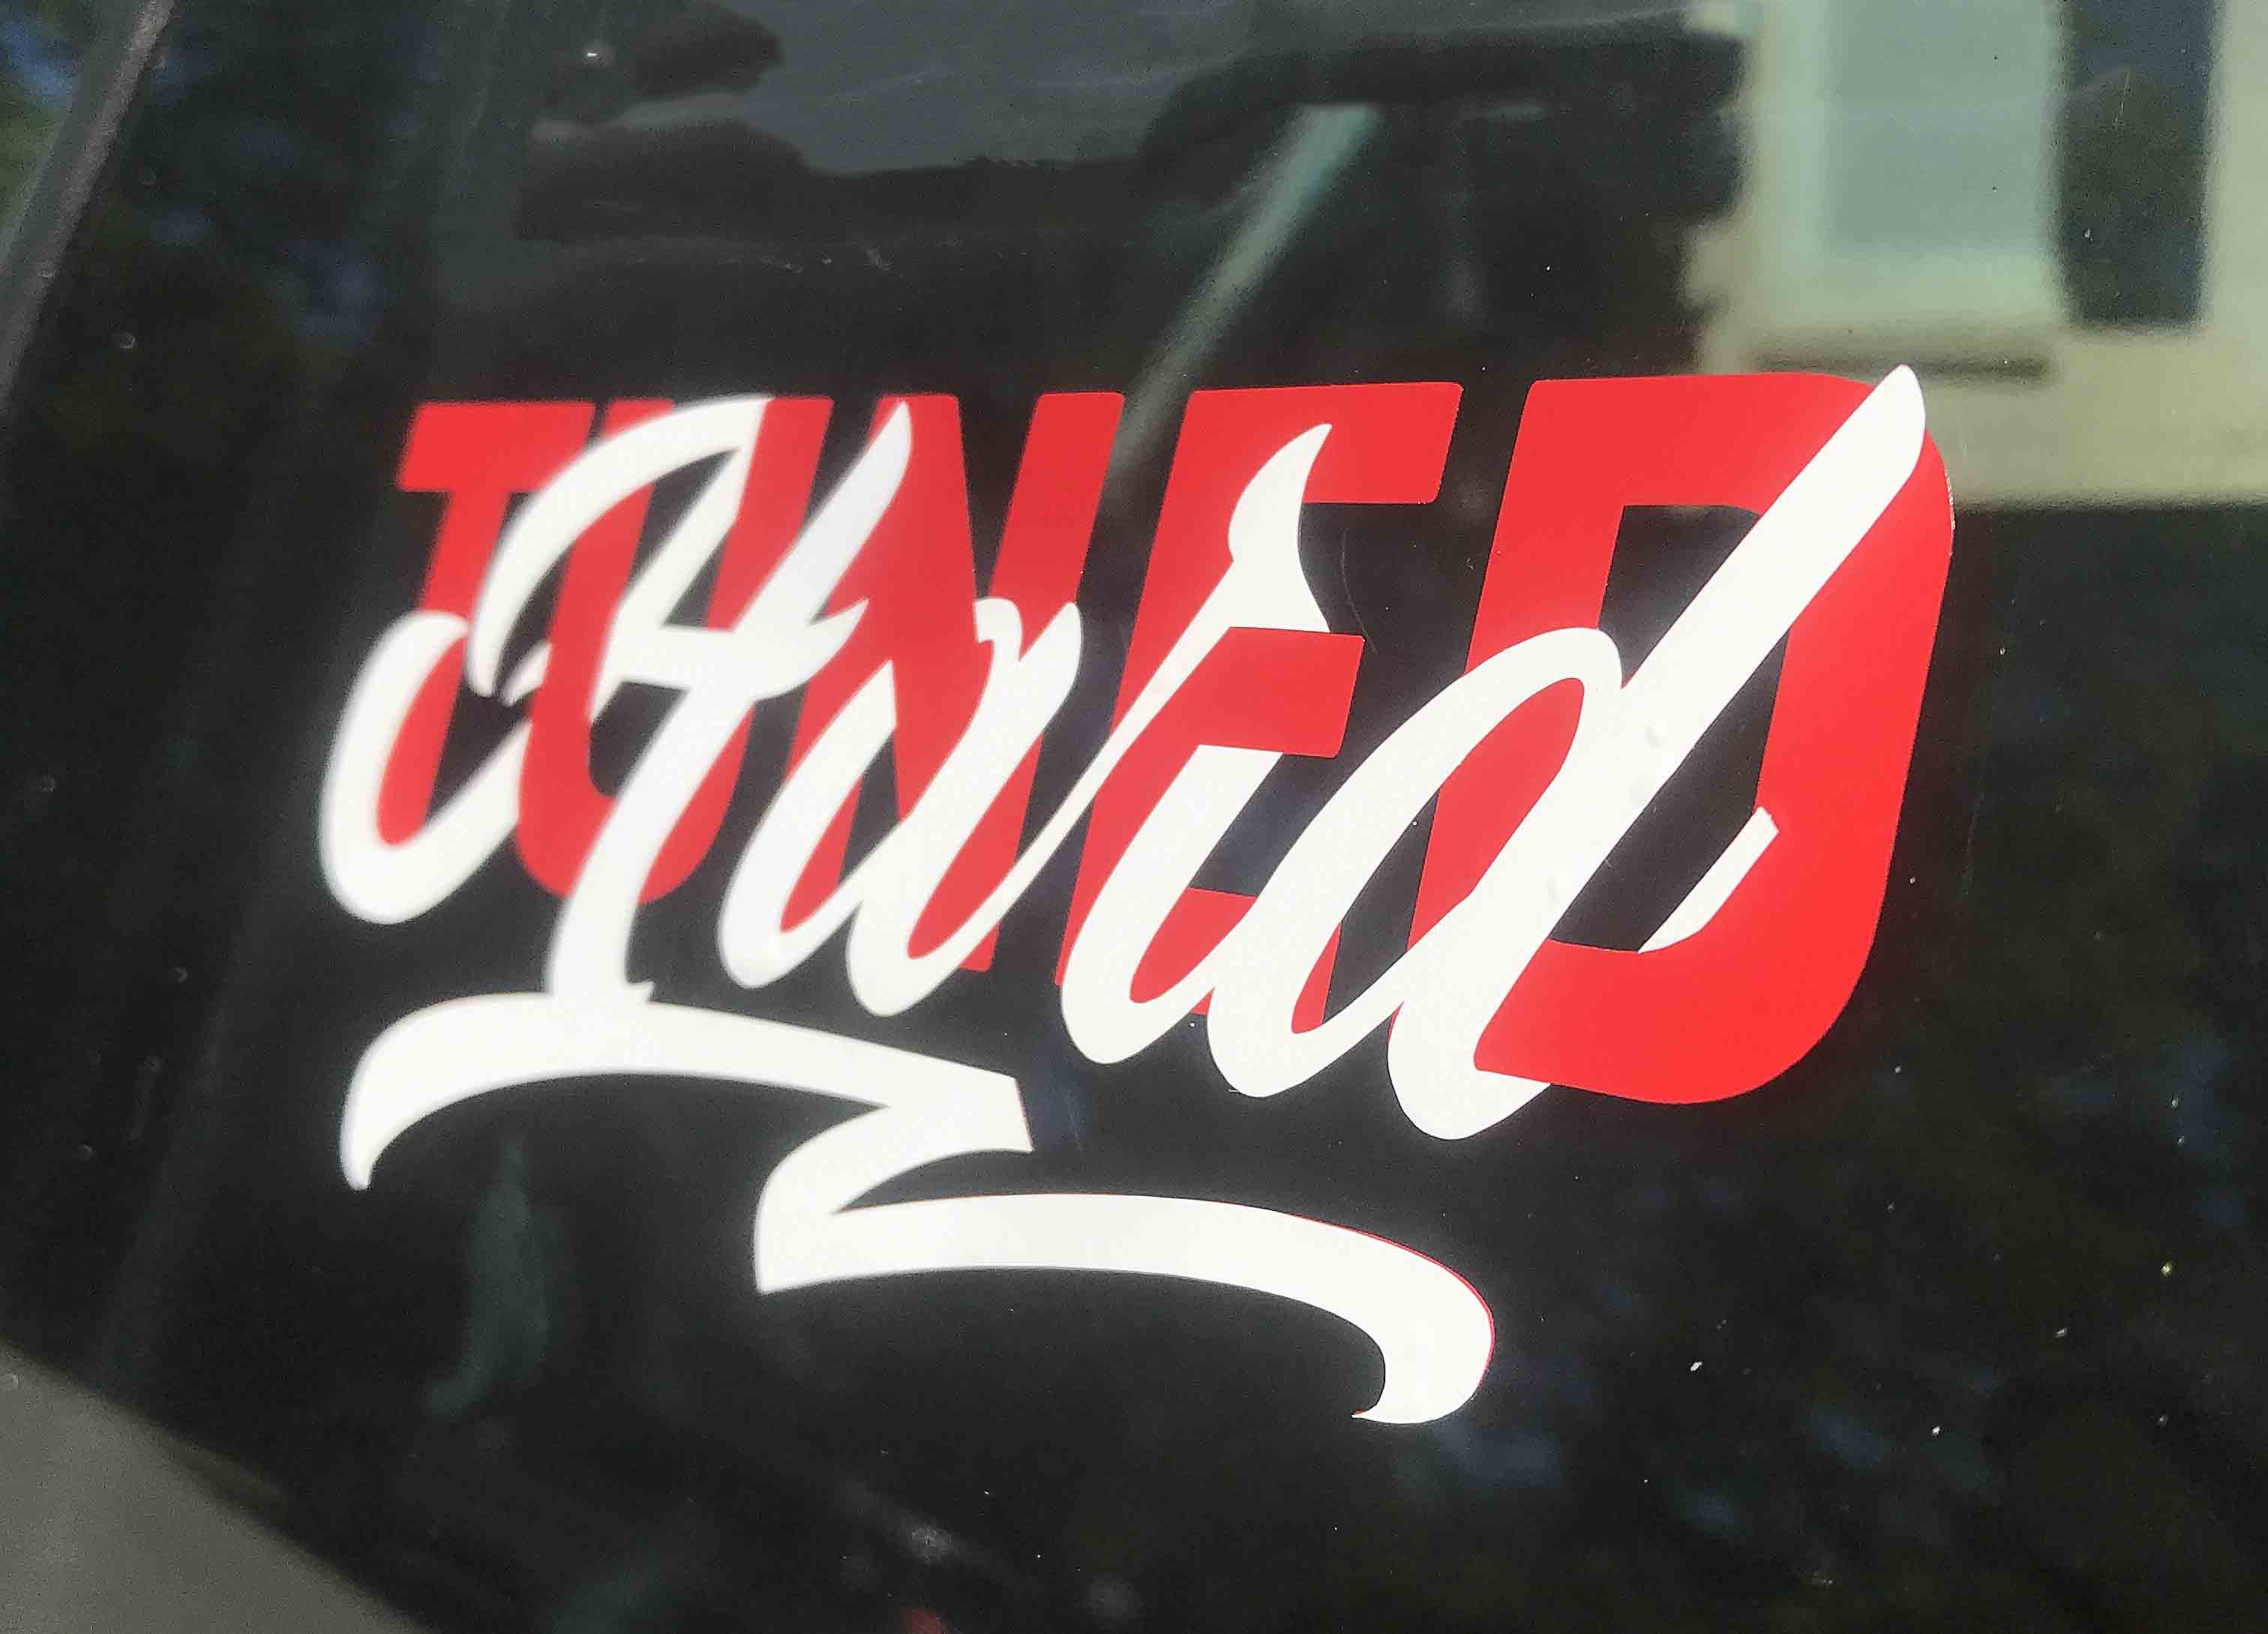 HARD Tuned vinyl sticker for lowered or modified cars